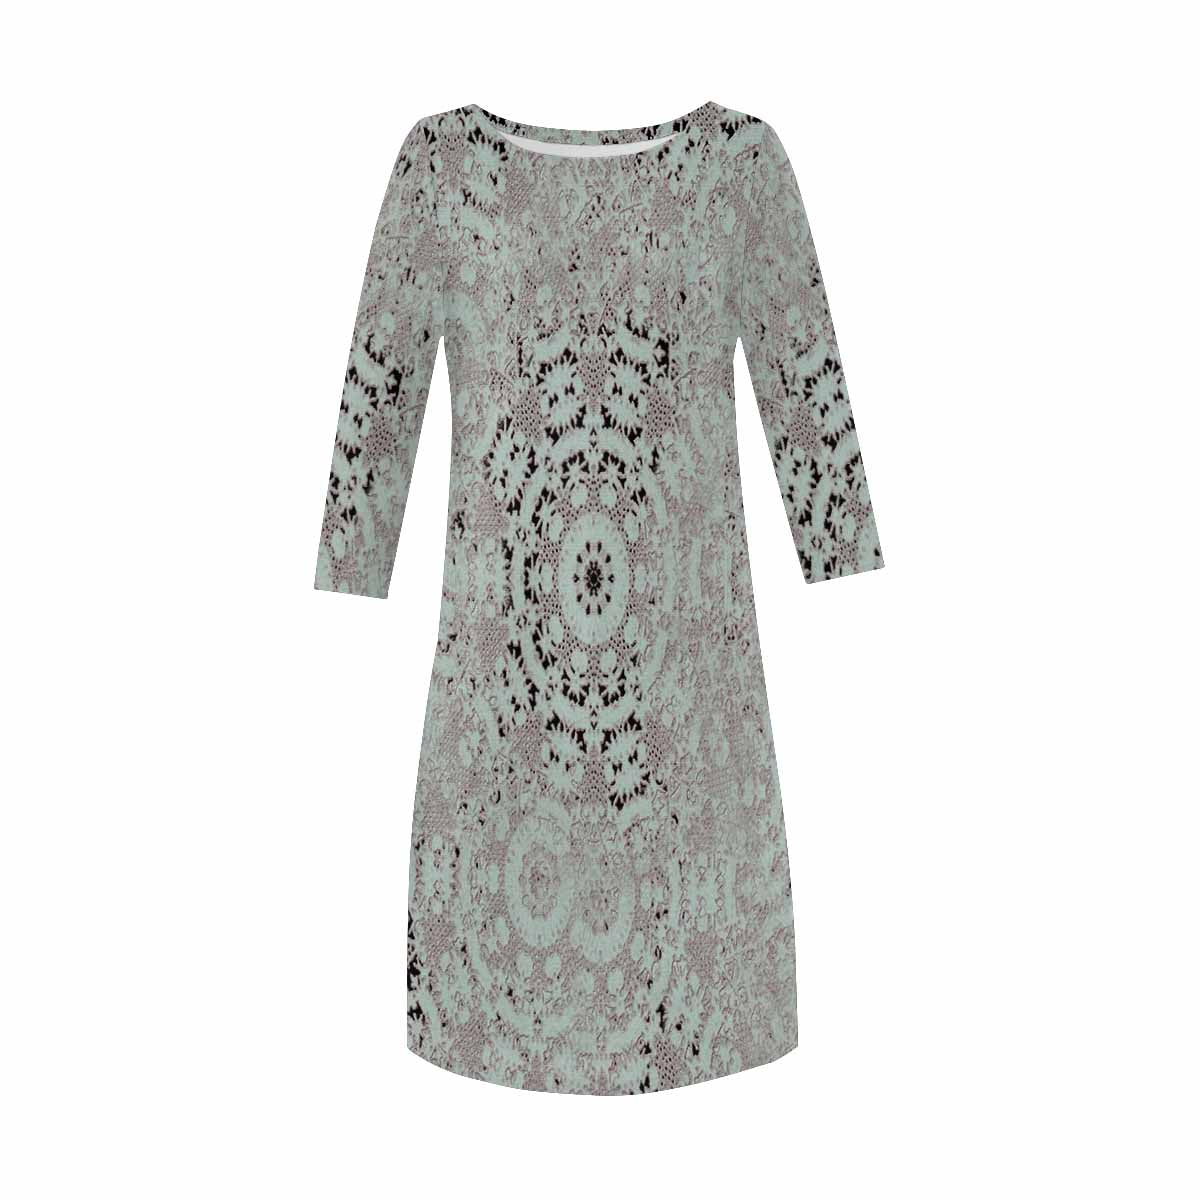 Victorian printed lace loose dress, Design 51